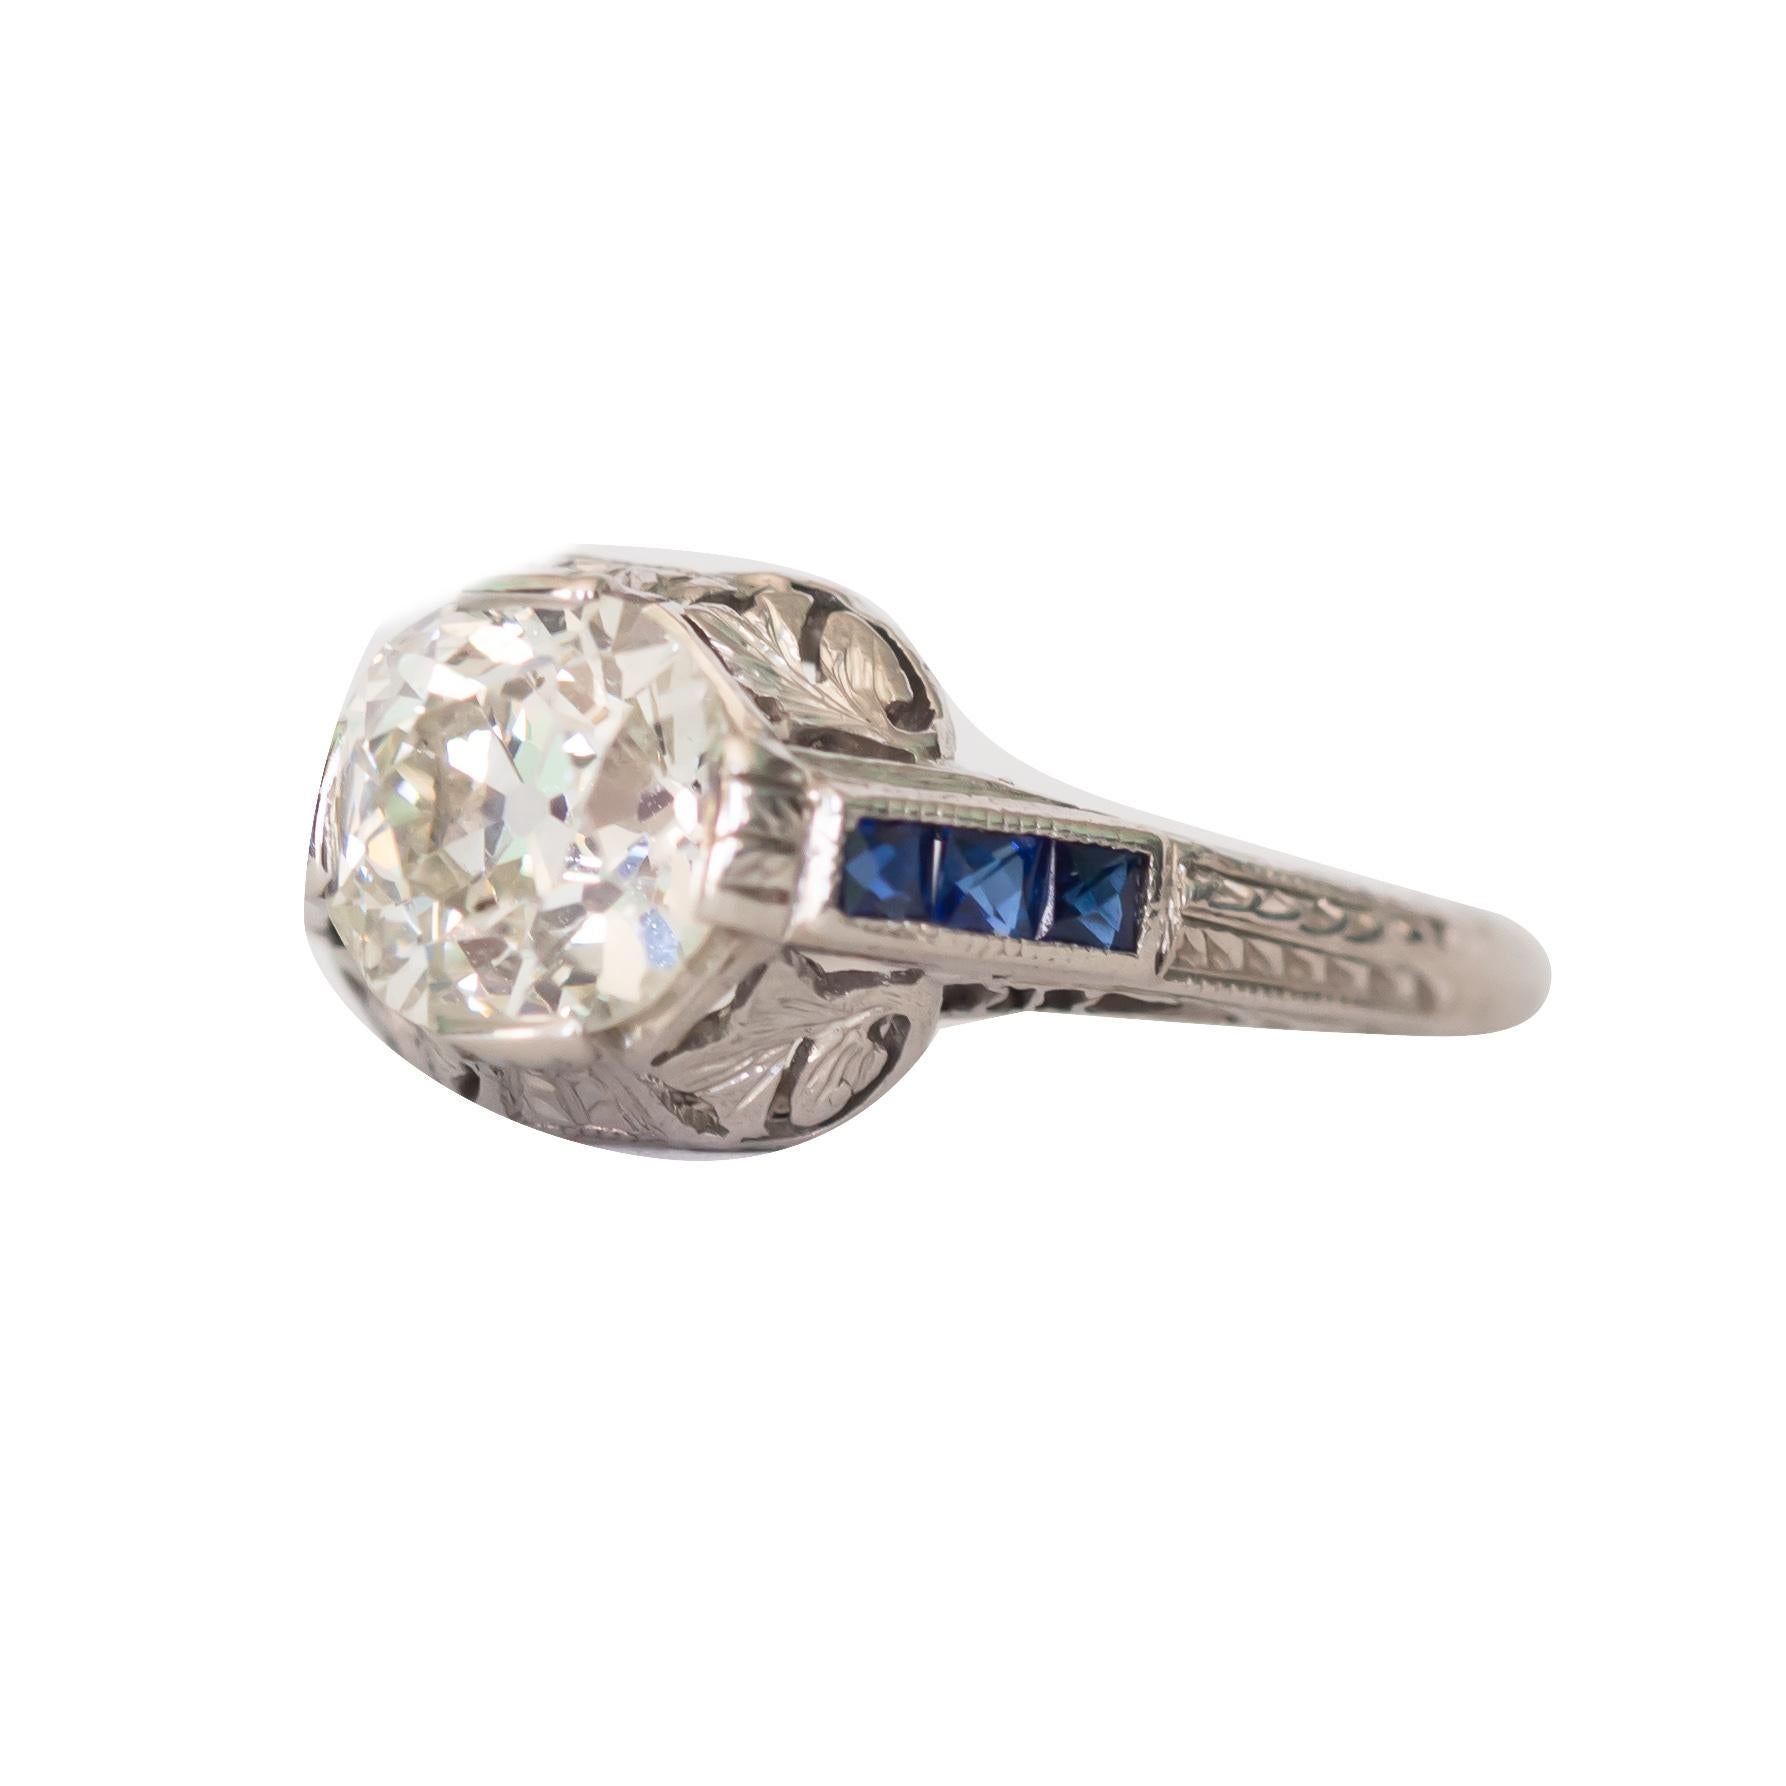 Ring Size: 5.75
Metal Type: Platinum  [Hallmarked, and Tested]
Weight: 3 grams

Center Diamond Details:
GIA REPORT #6204430375
Weight: 1.17 carat
Cut:  Antique Cushion
Color: K 
Clarity: SI1

Side Sapphire Details:
Weight: .25 carat, total